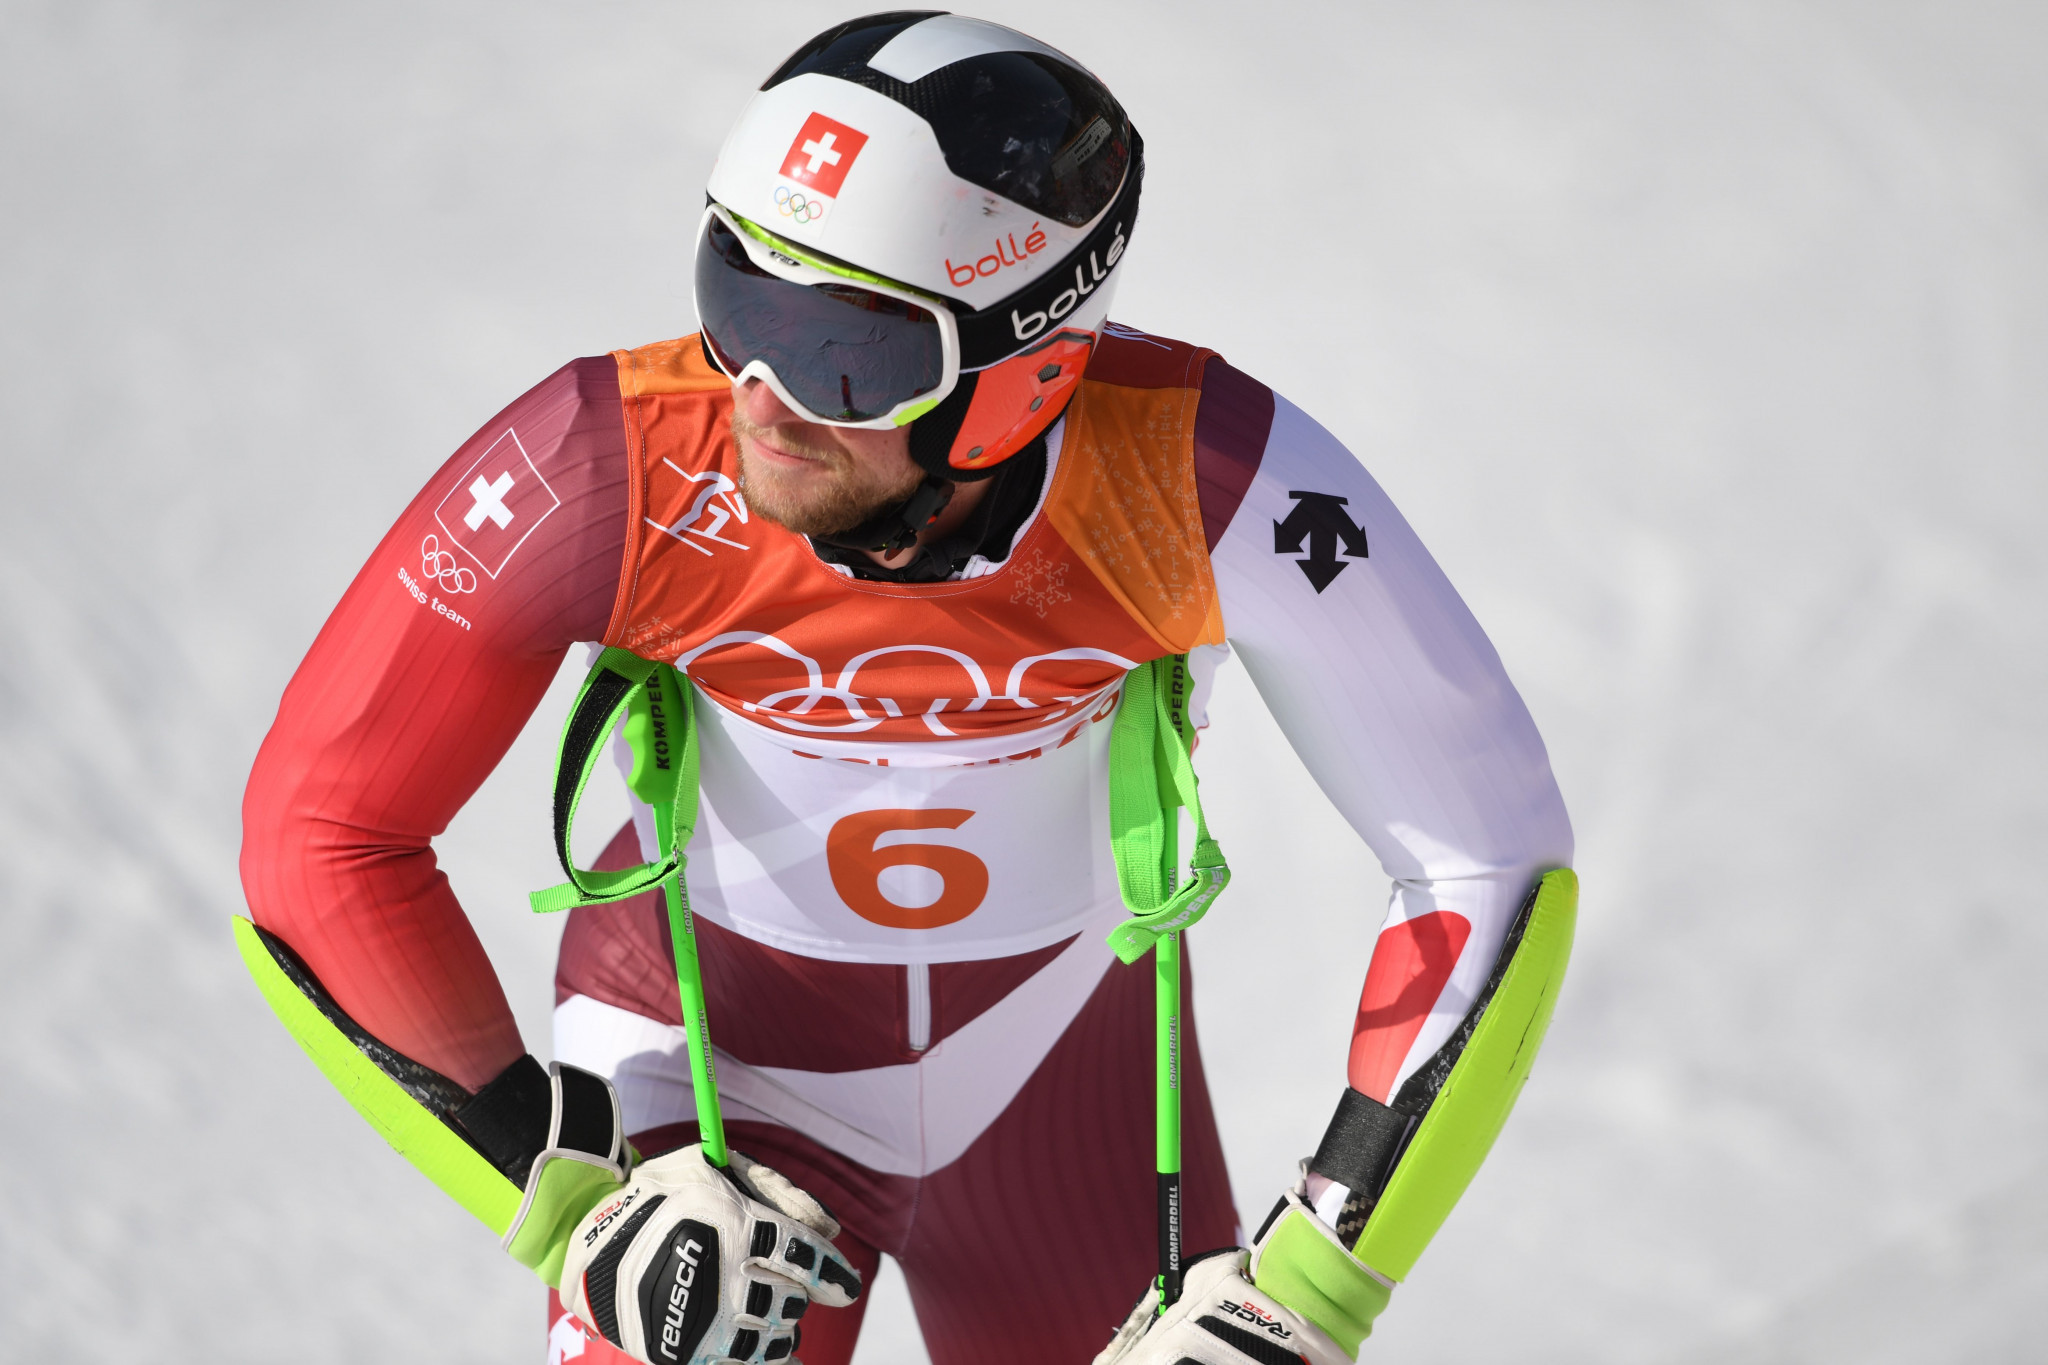 Swiss Alpine skier Justin Murisier will miss the entirety of the 2018-2019 season after suffering the third serious knee injury of his career ©Getty Images